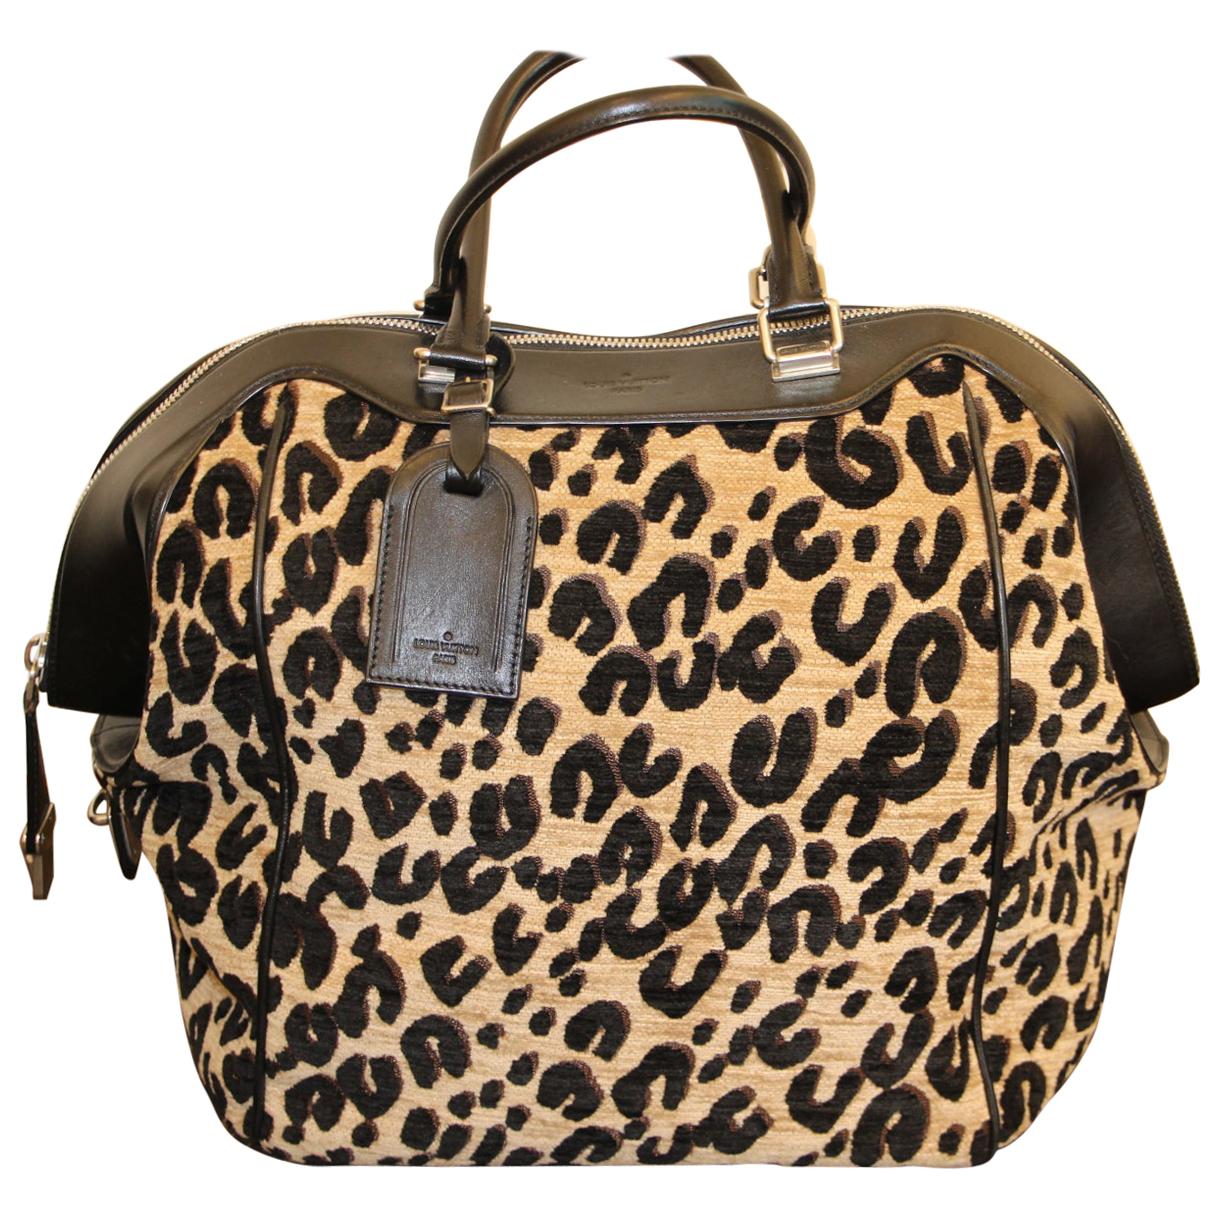 Louis Vuitton-Stephen Sprouse Bag Limited Edition "North South" In Leopar Canvas